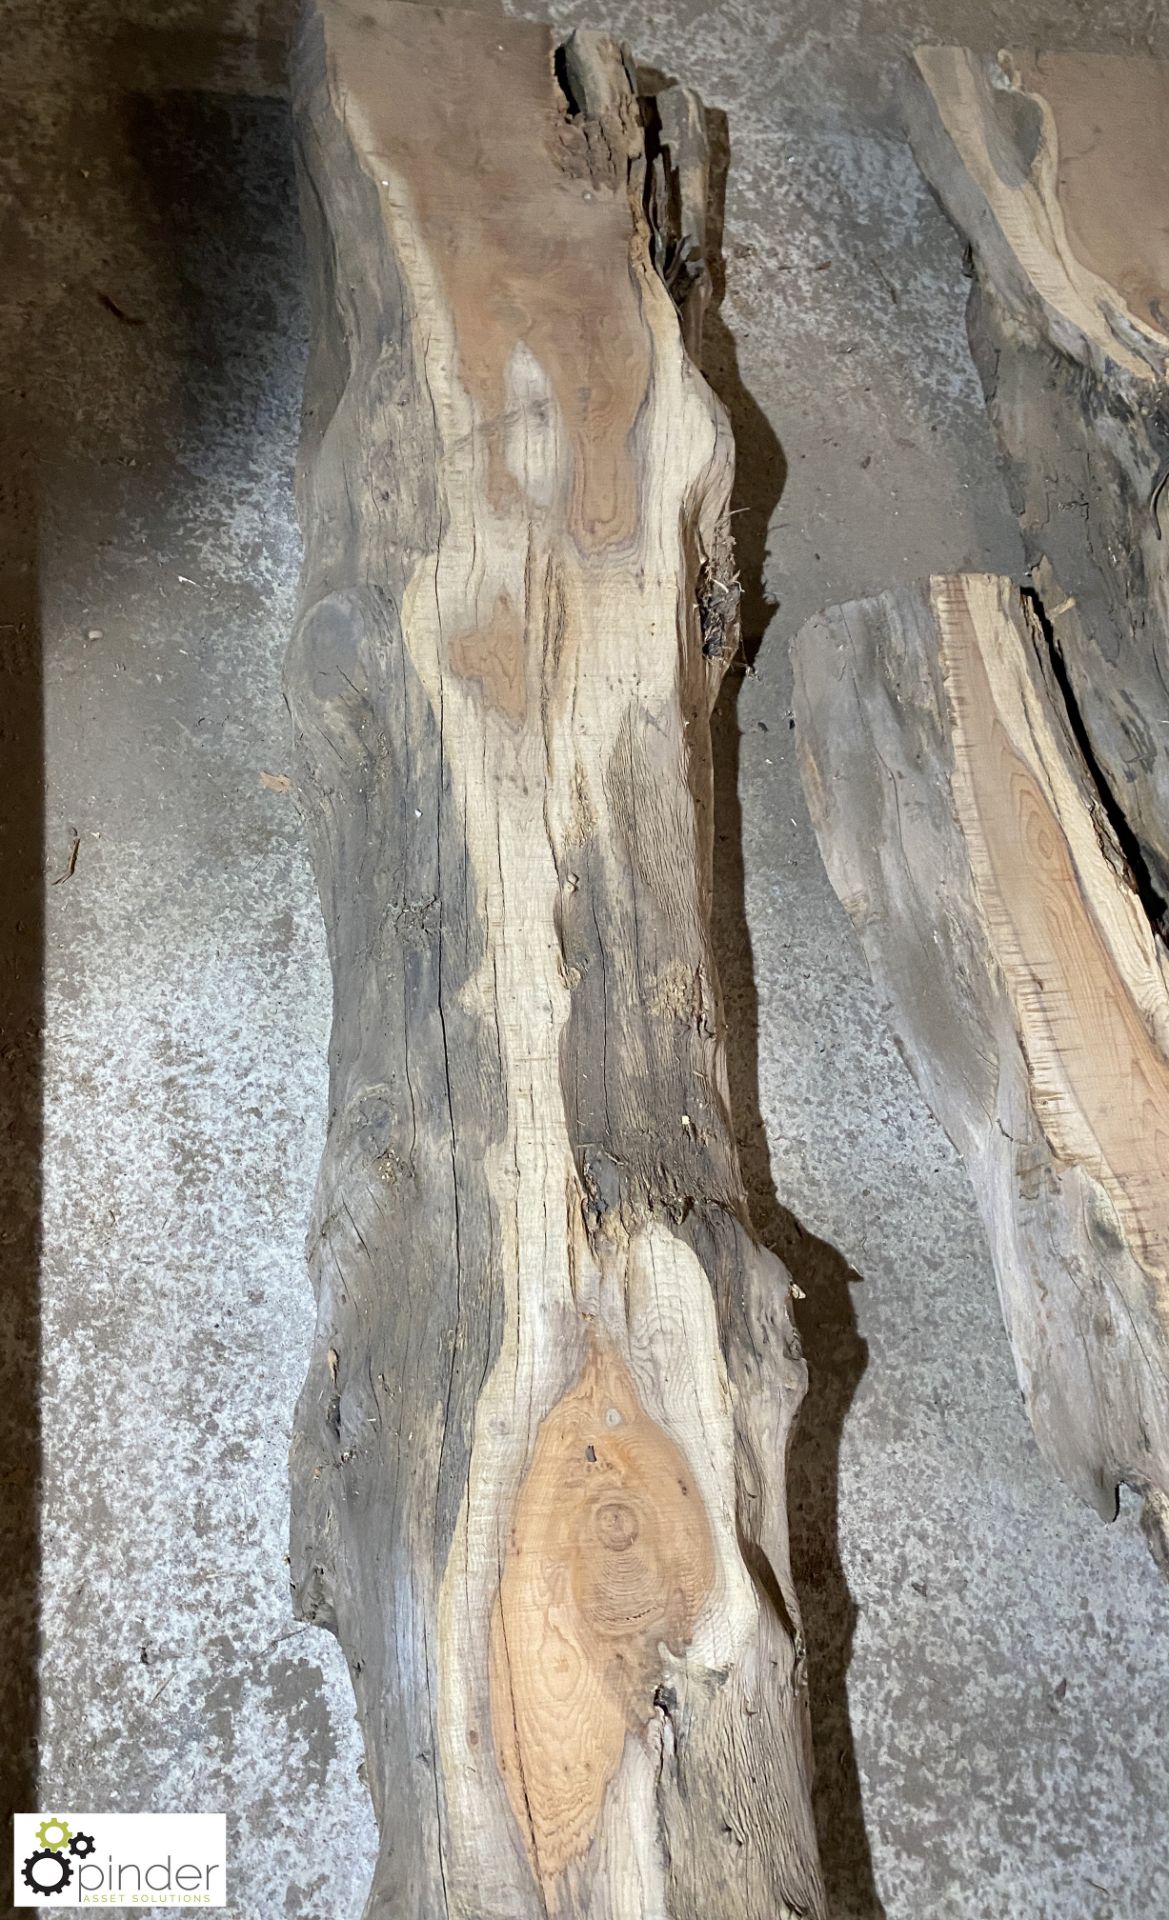 Air dried Yew Board, 3550mm x 250mm x 100mm - Image 5 of 6